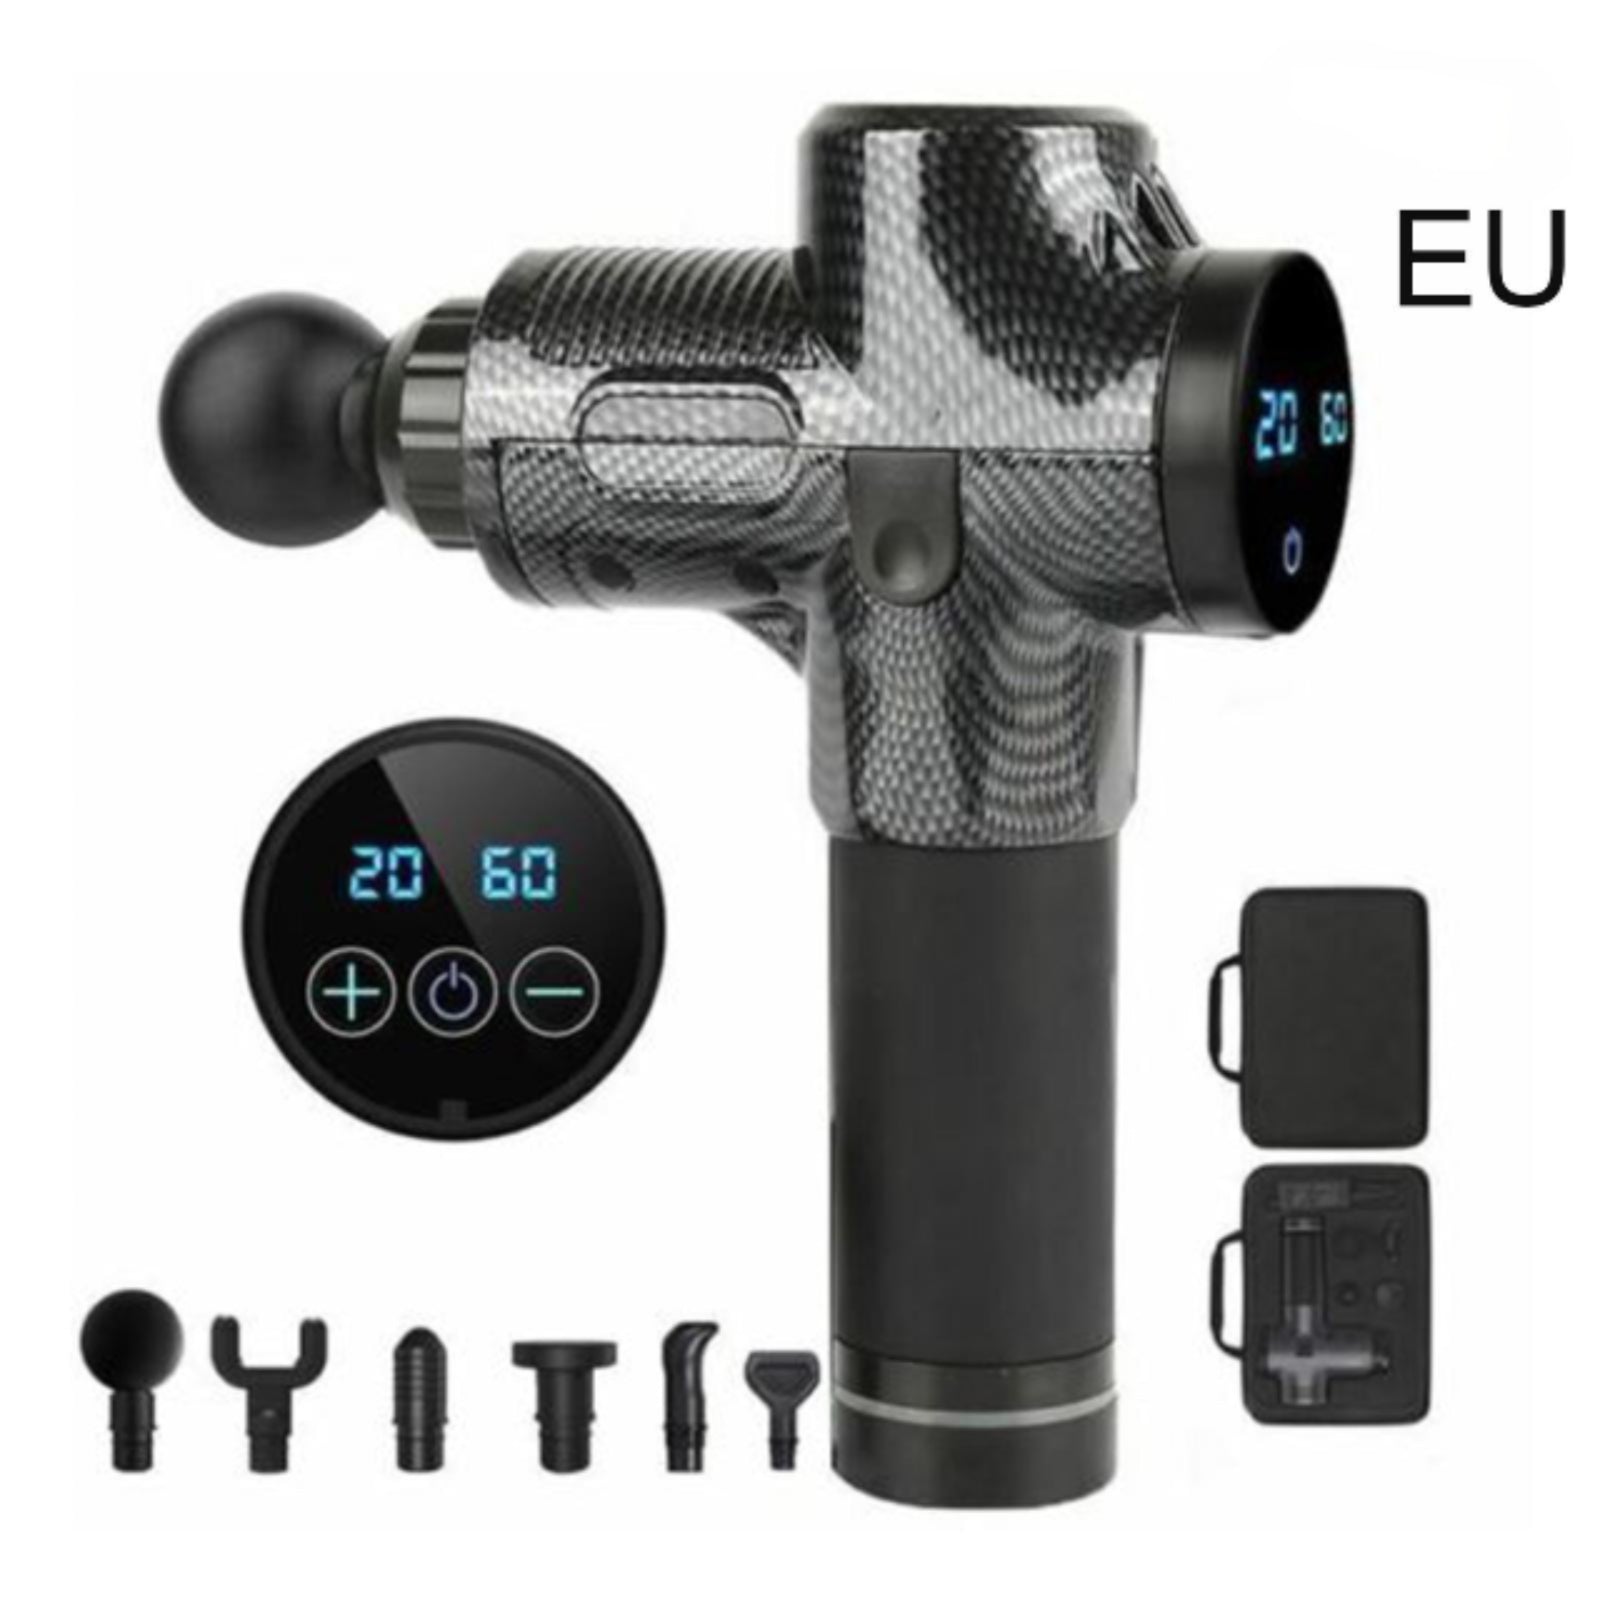 Relieve muscle soreness and tension instantly with our powerful and portable massage gun. Whether you're an athlete, fitness enthusiast, or just someone looking to relax, this Deep Body Massager can provide instant relief from soreness and tension in your muscles. EU plug